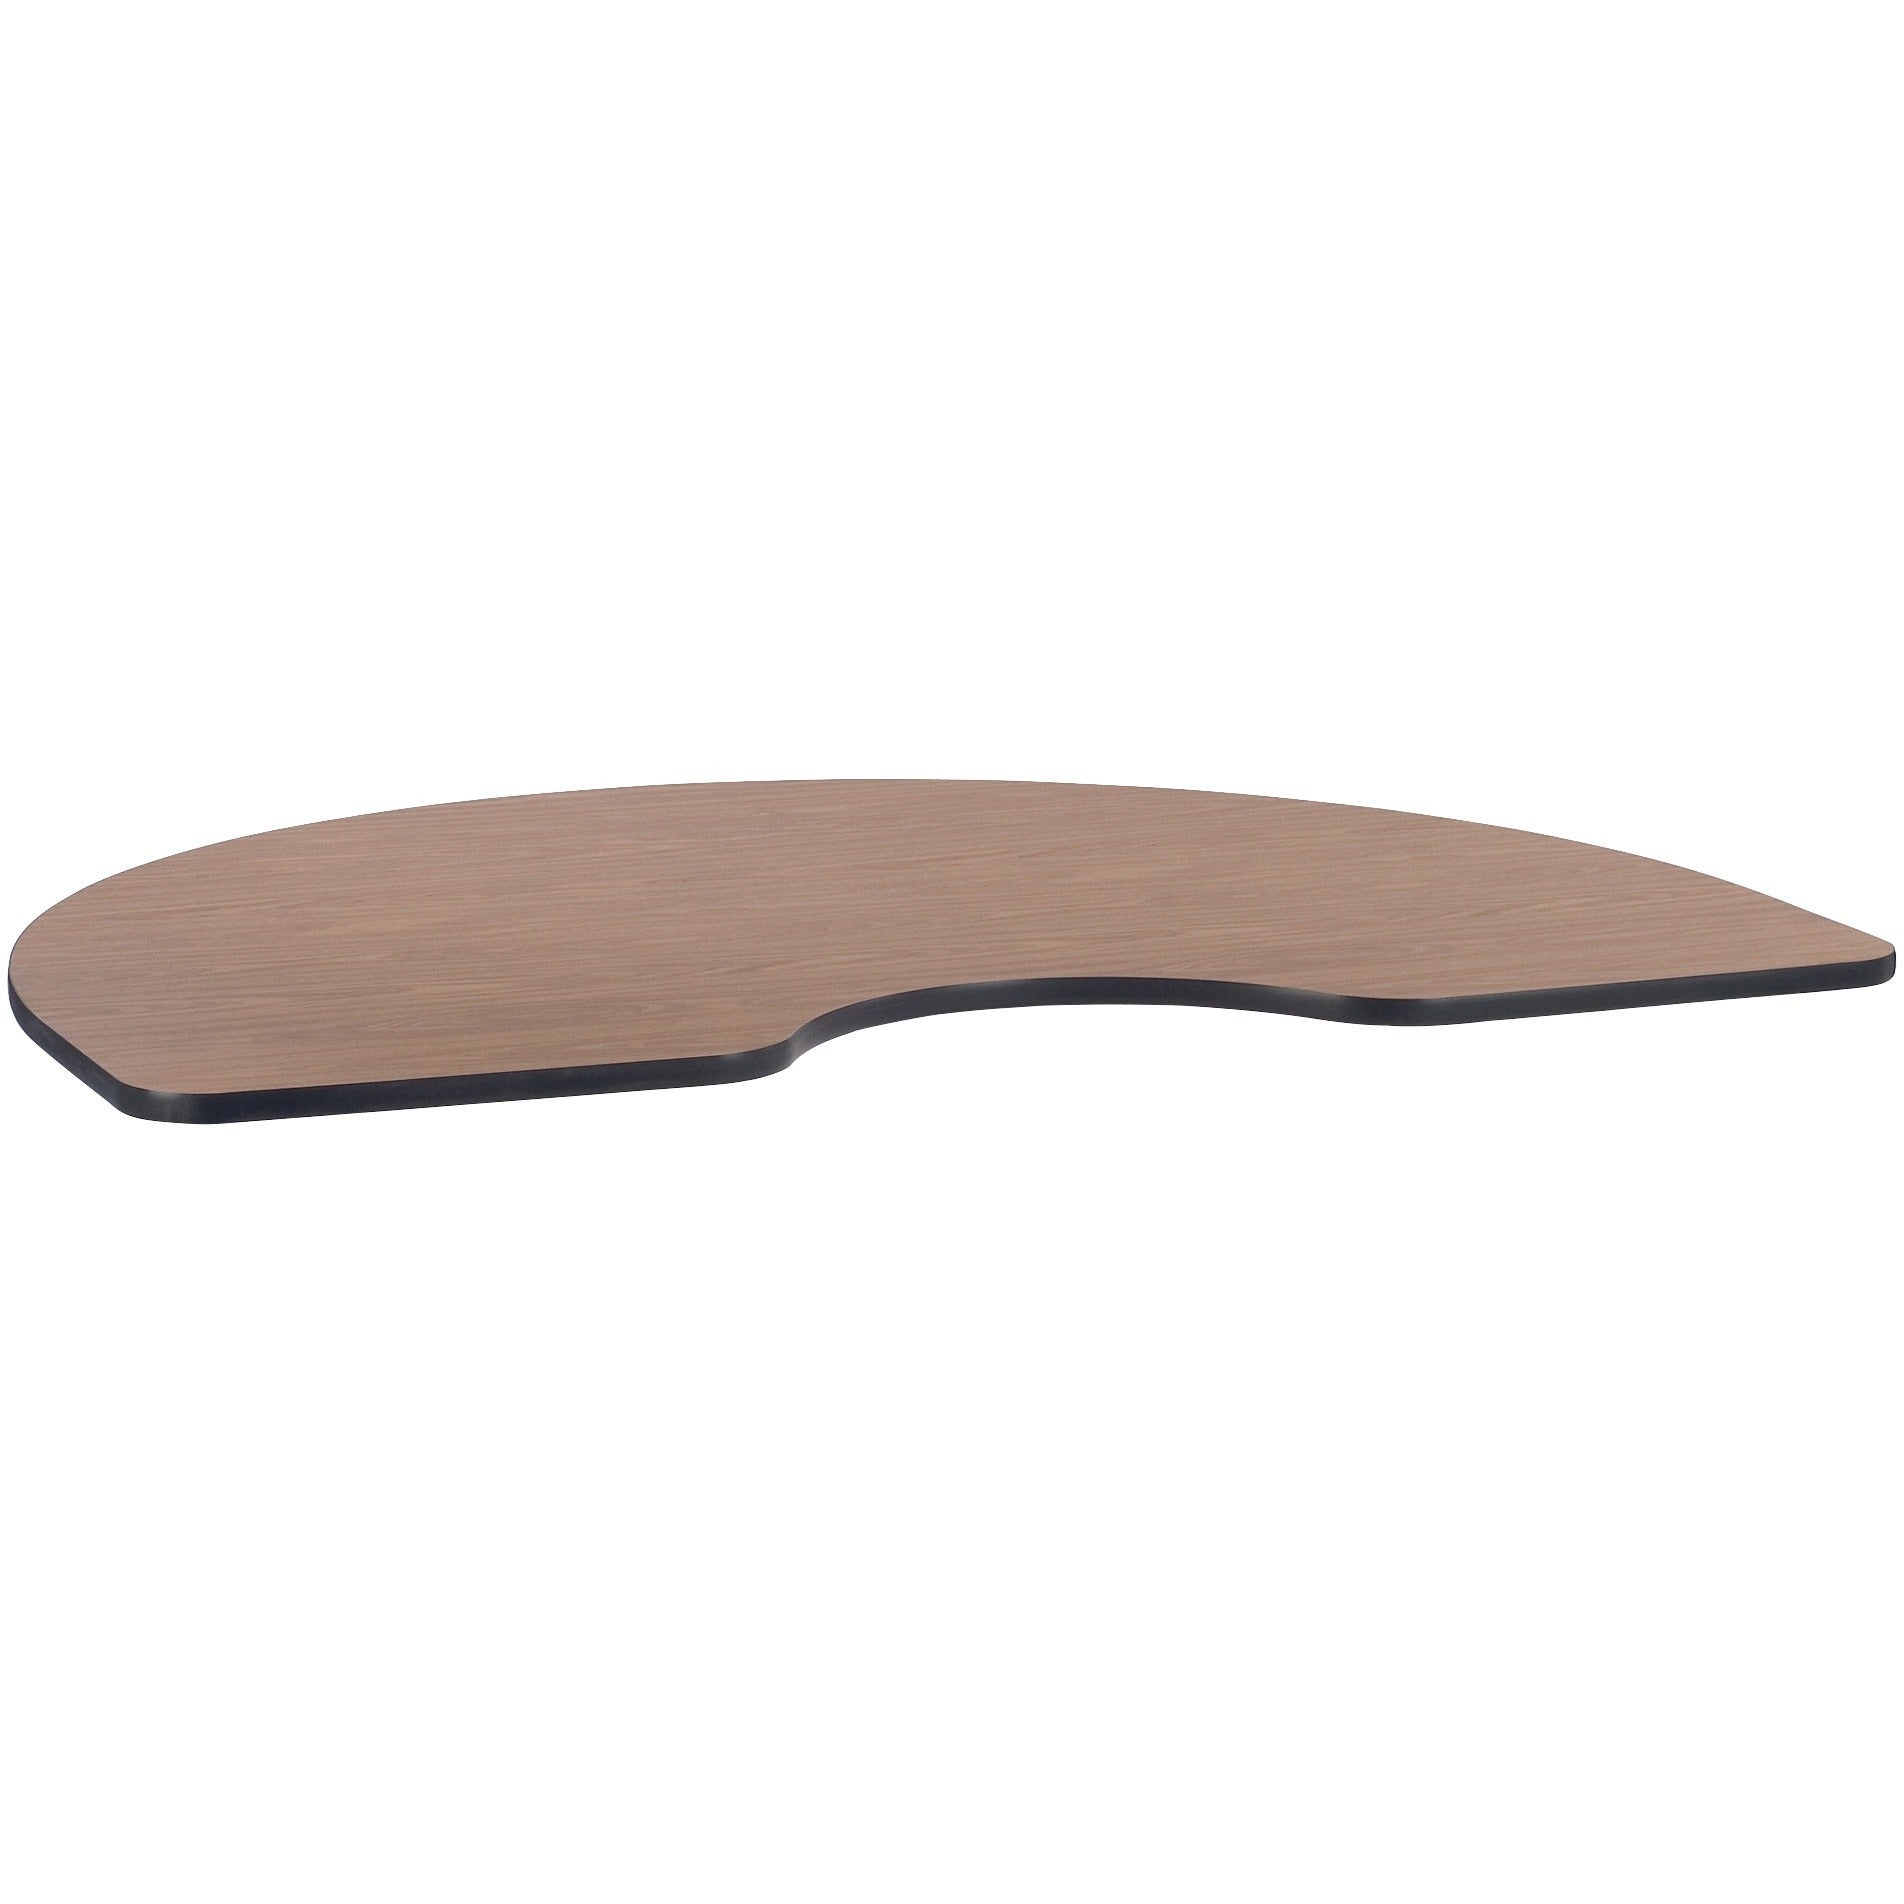 lorell-classroom-activity-tabletop-for-table-tophigh-pressure-laminate-hpl-kidney-shaped-medium-oak-top-x-72-table-top-width-x-48-table-top-depth-x-113-table-top-thickness-1-each_llr99898 - 2